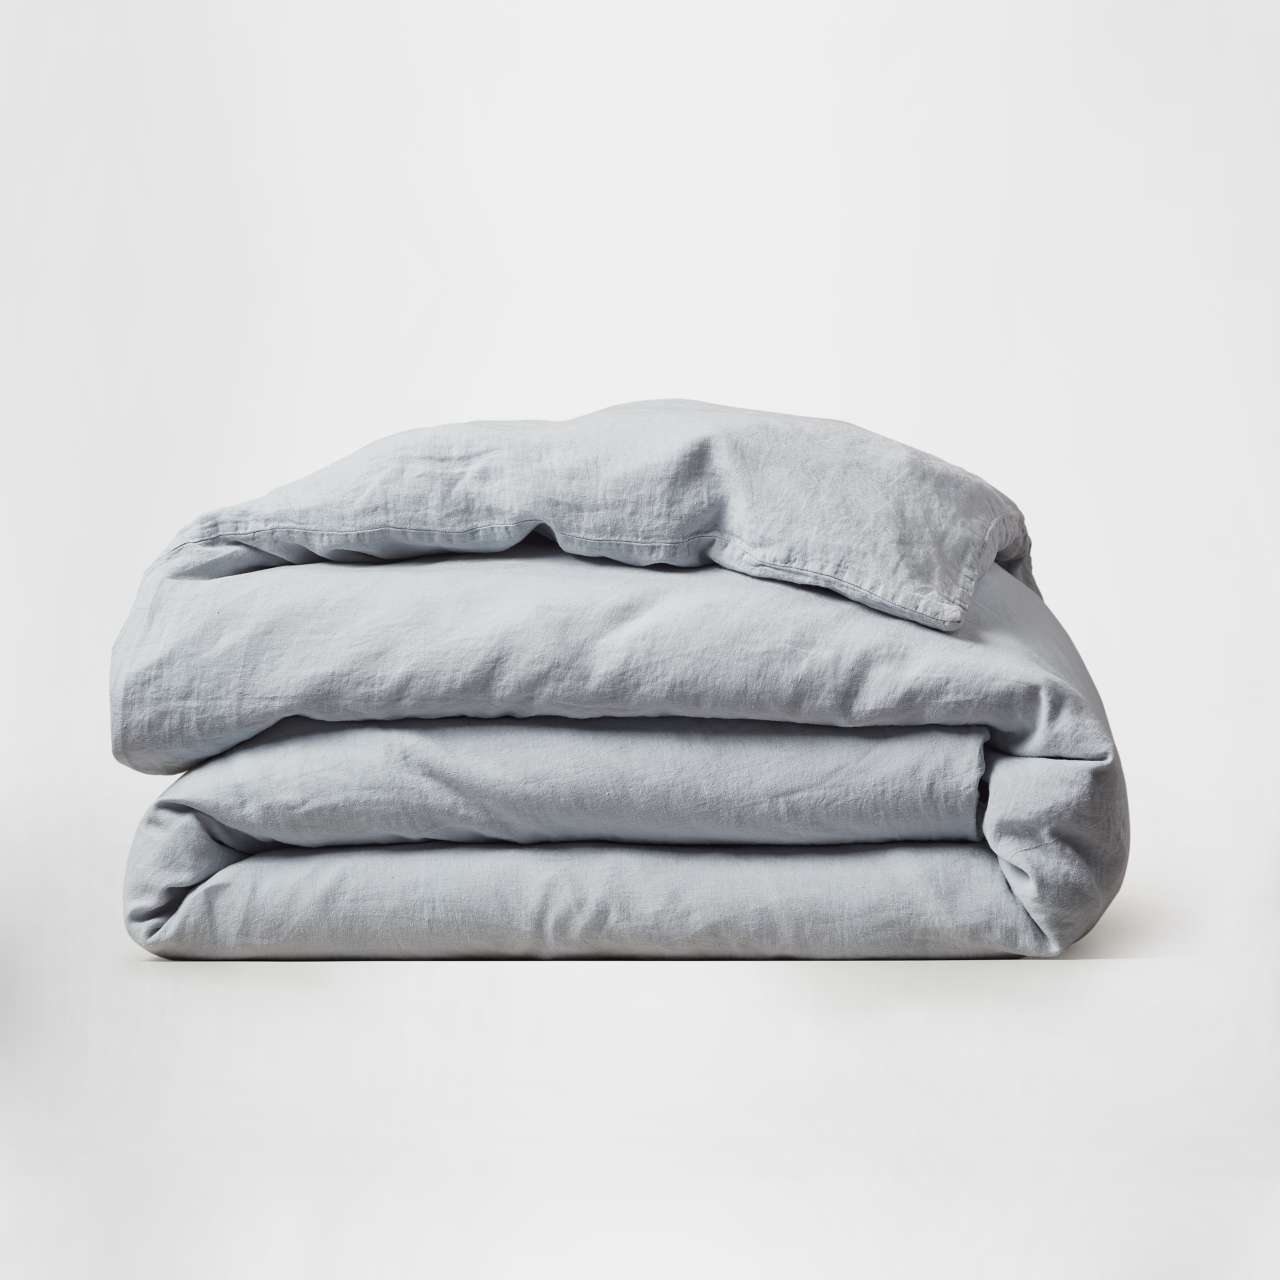 Flax Linen Bed Sheets Image 1